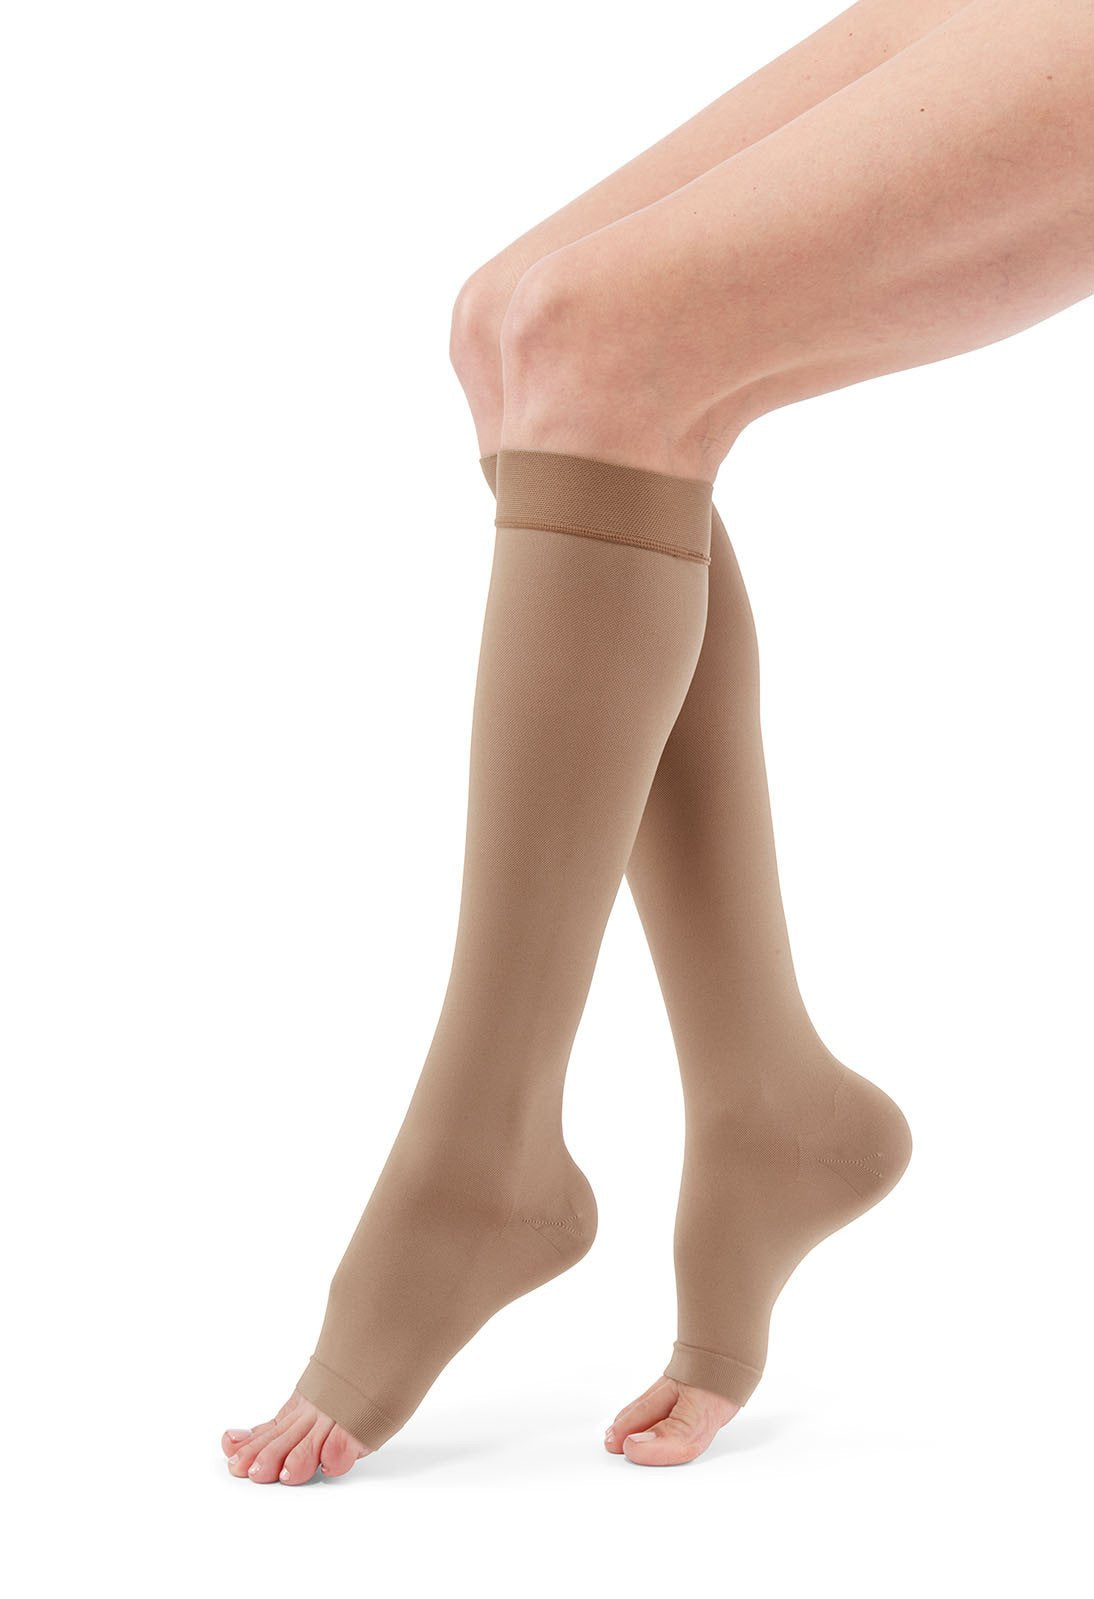 duomed advantage, 30-40 mmHg, Calf High, Open Toe Compression Stockings -  Indiana Vein Specialists